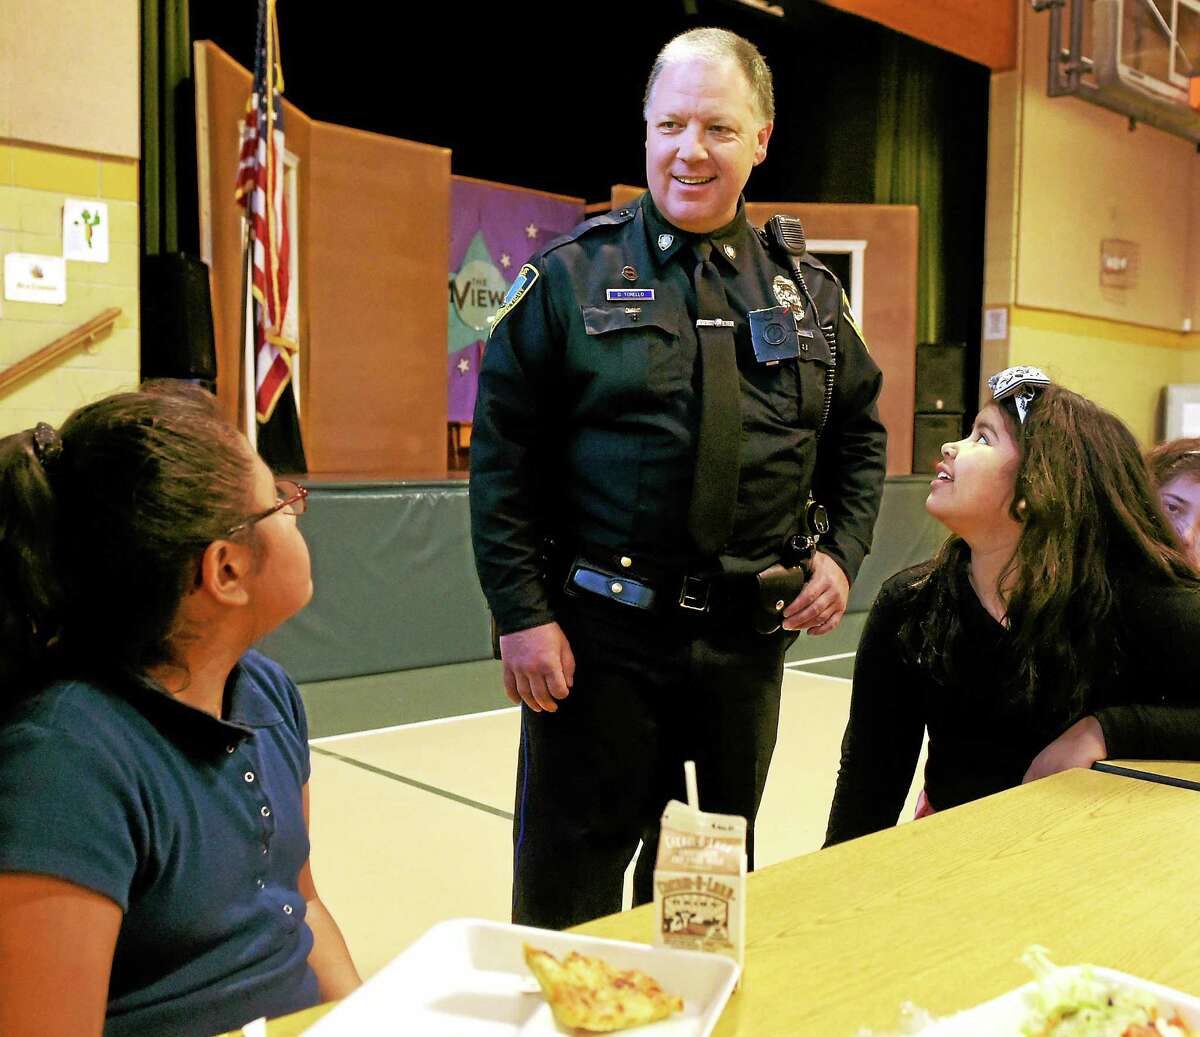 East Haven Police Officer Dave Torello, D.A.R.E. program officer, with Tuttle School fourth-graders during lunch in East Haven Friday.